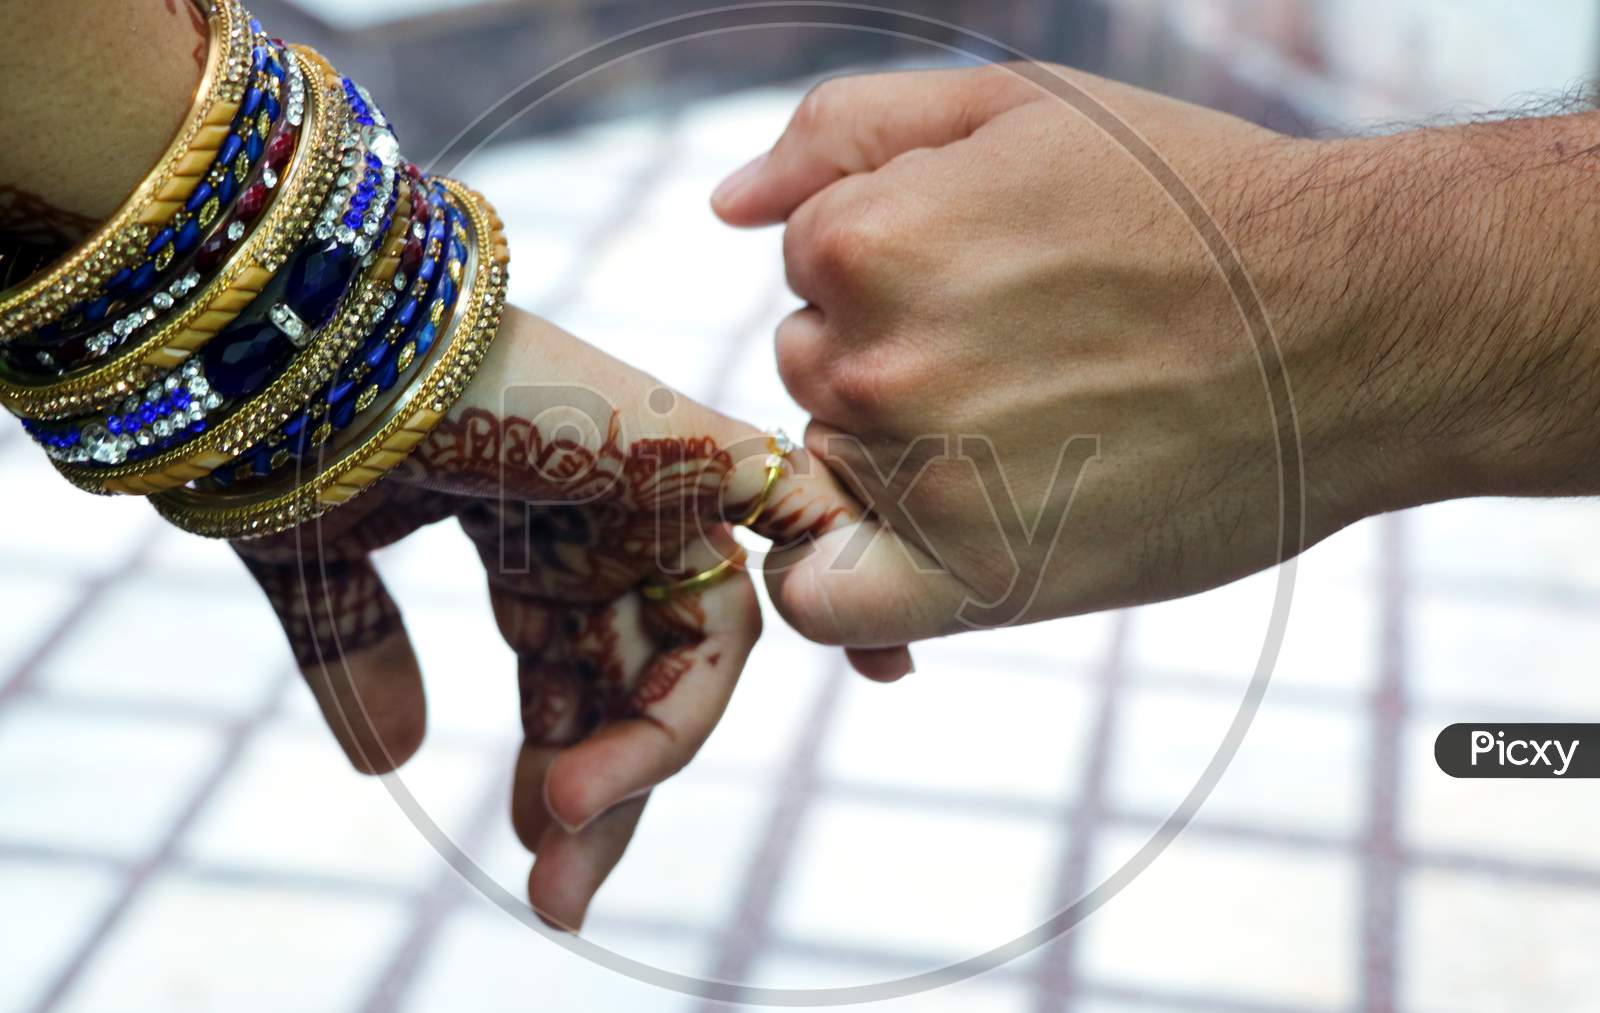 Closeup Image Of A Man'S And Woman'S Hands Holding Little Fingers Of Each Other Isolated Over White Wall Background.